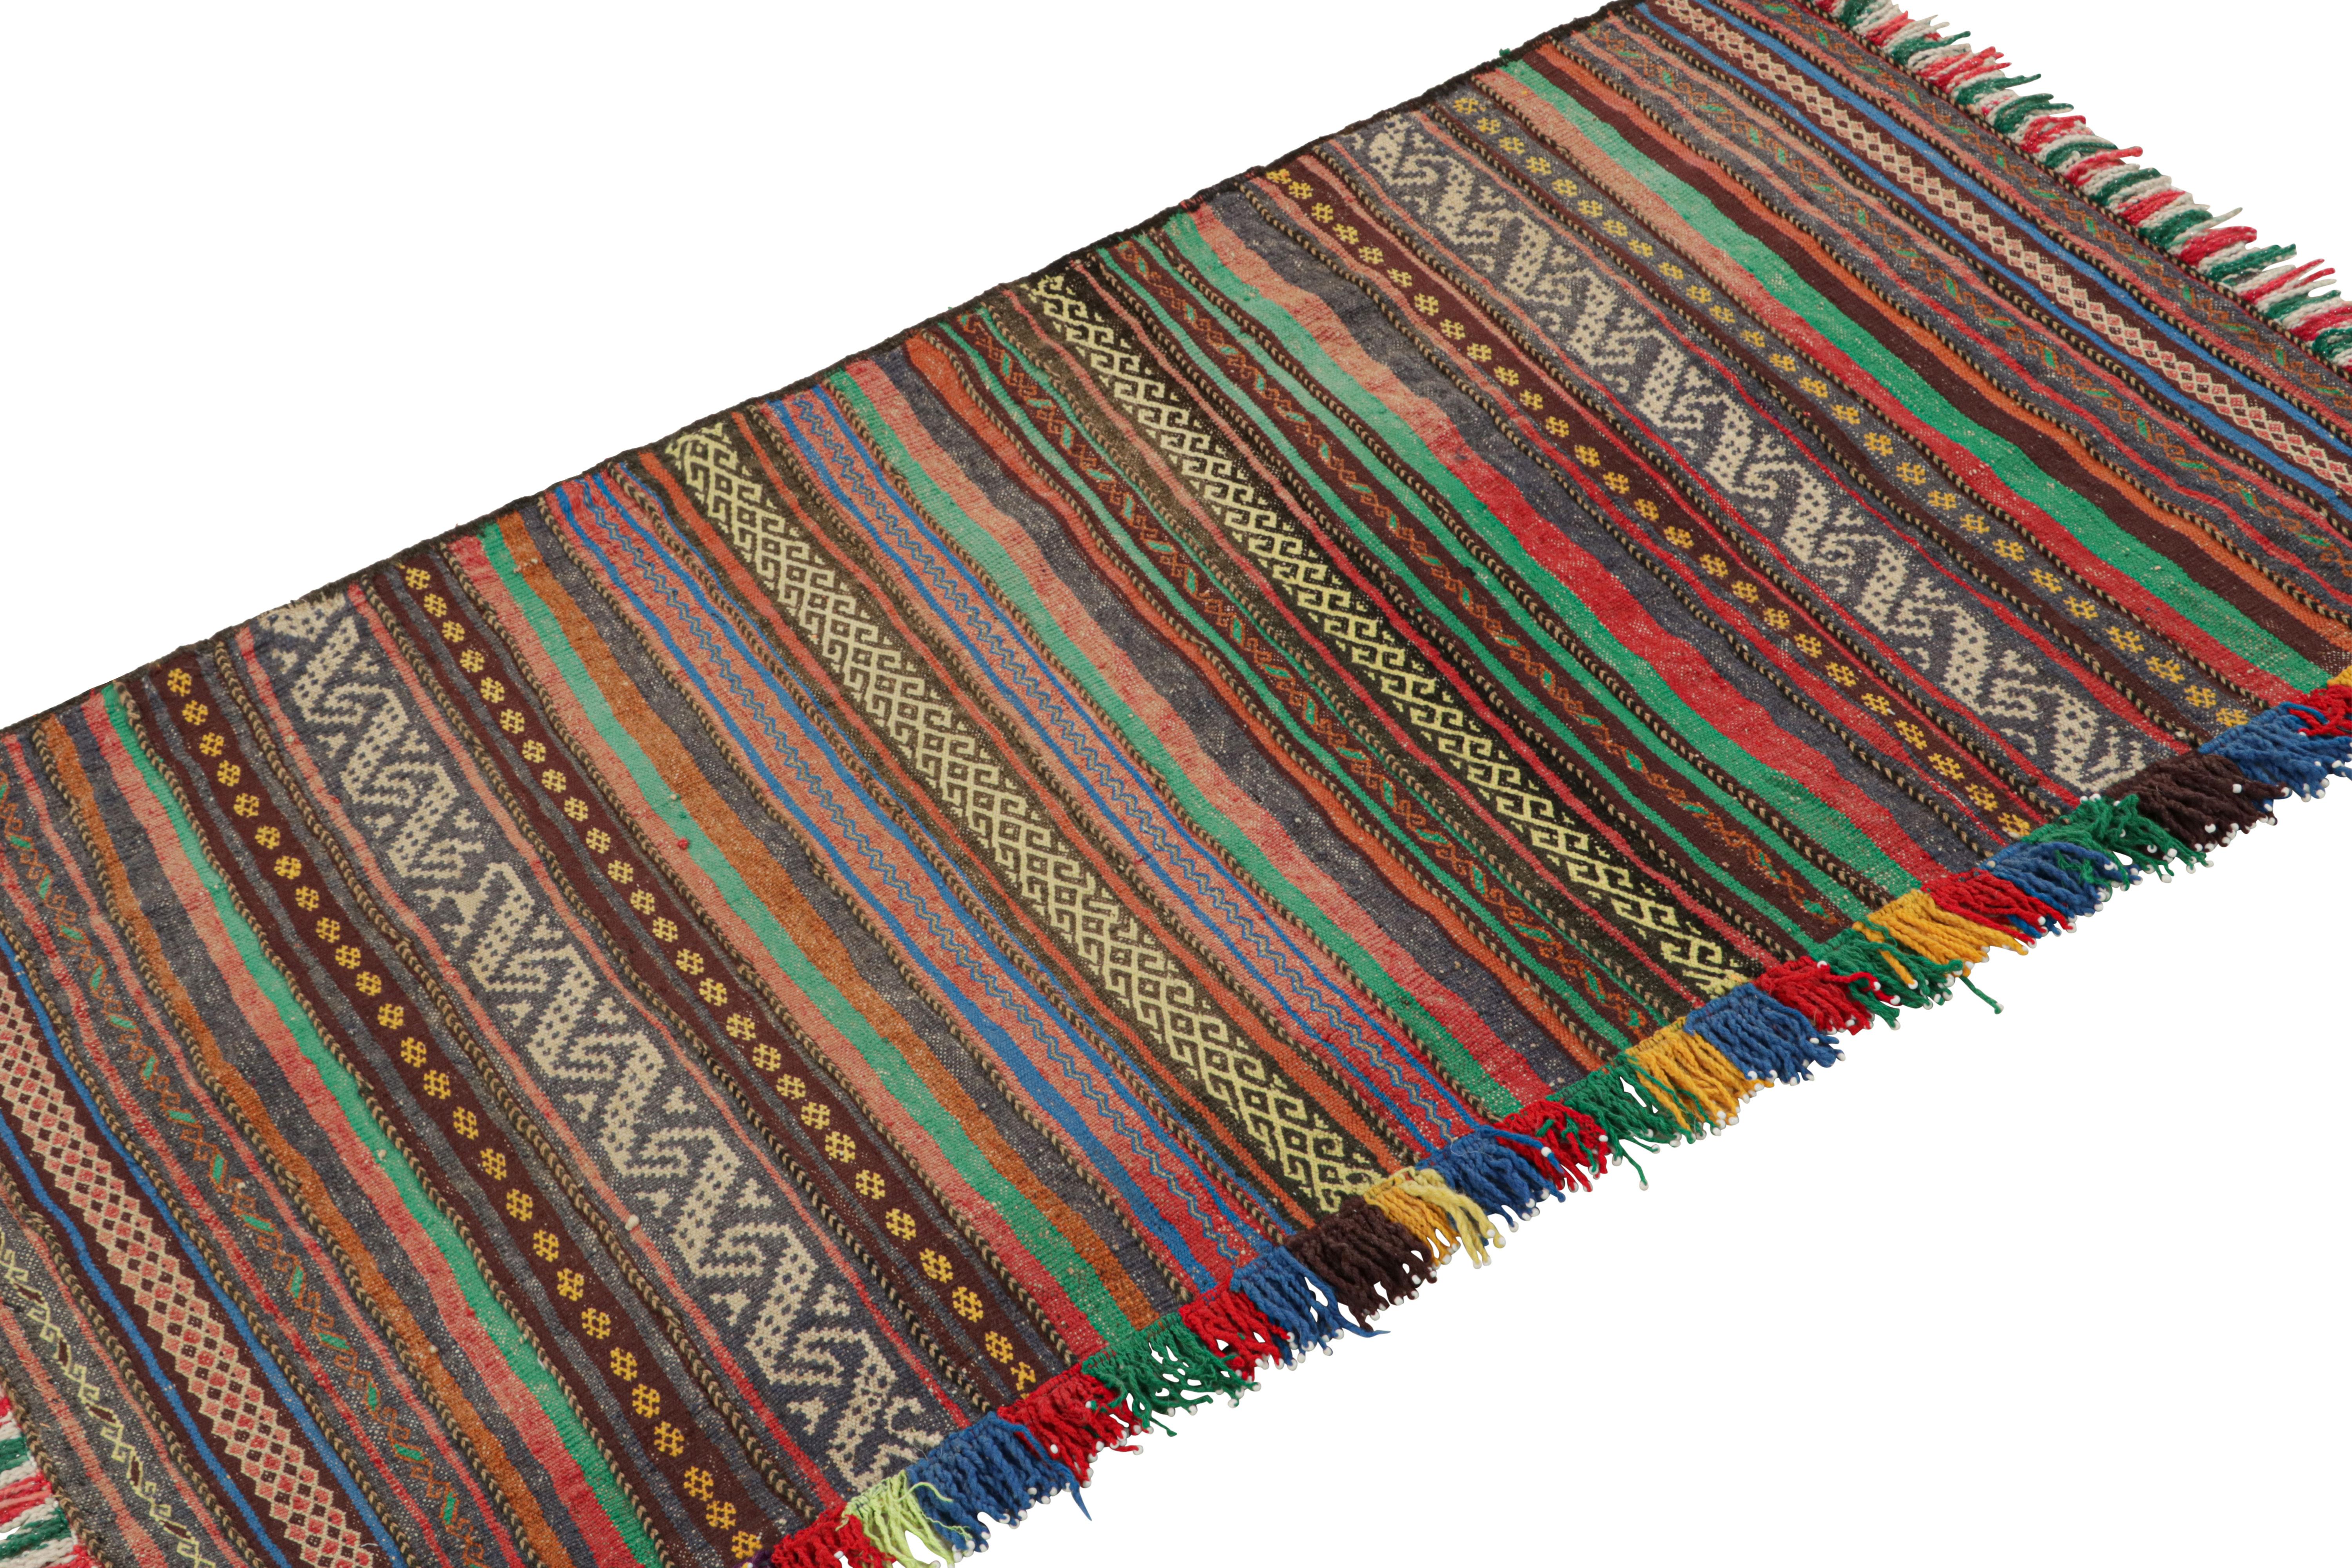 Handwoven in wool, this 2x4 vintage Afghan kilim rug originates circa 1950-1960—a tribal curation among new additions to the Rug & Kilim collection.

On the Design:

A polychromatic colorway with both rich and vibrant hues underscores both stripes